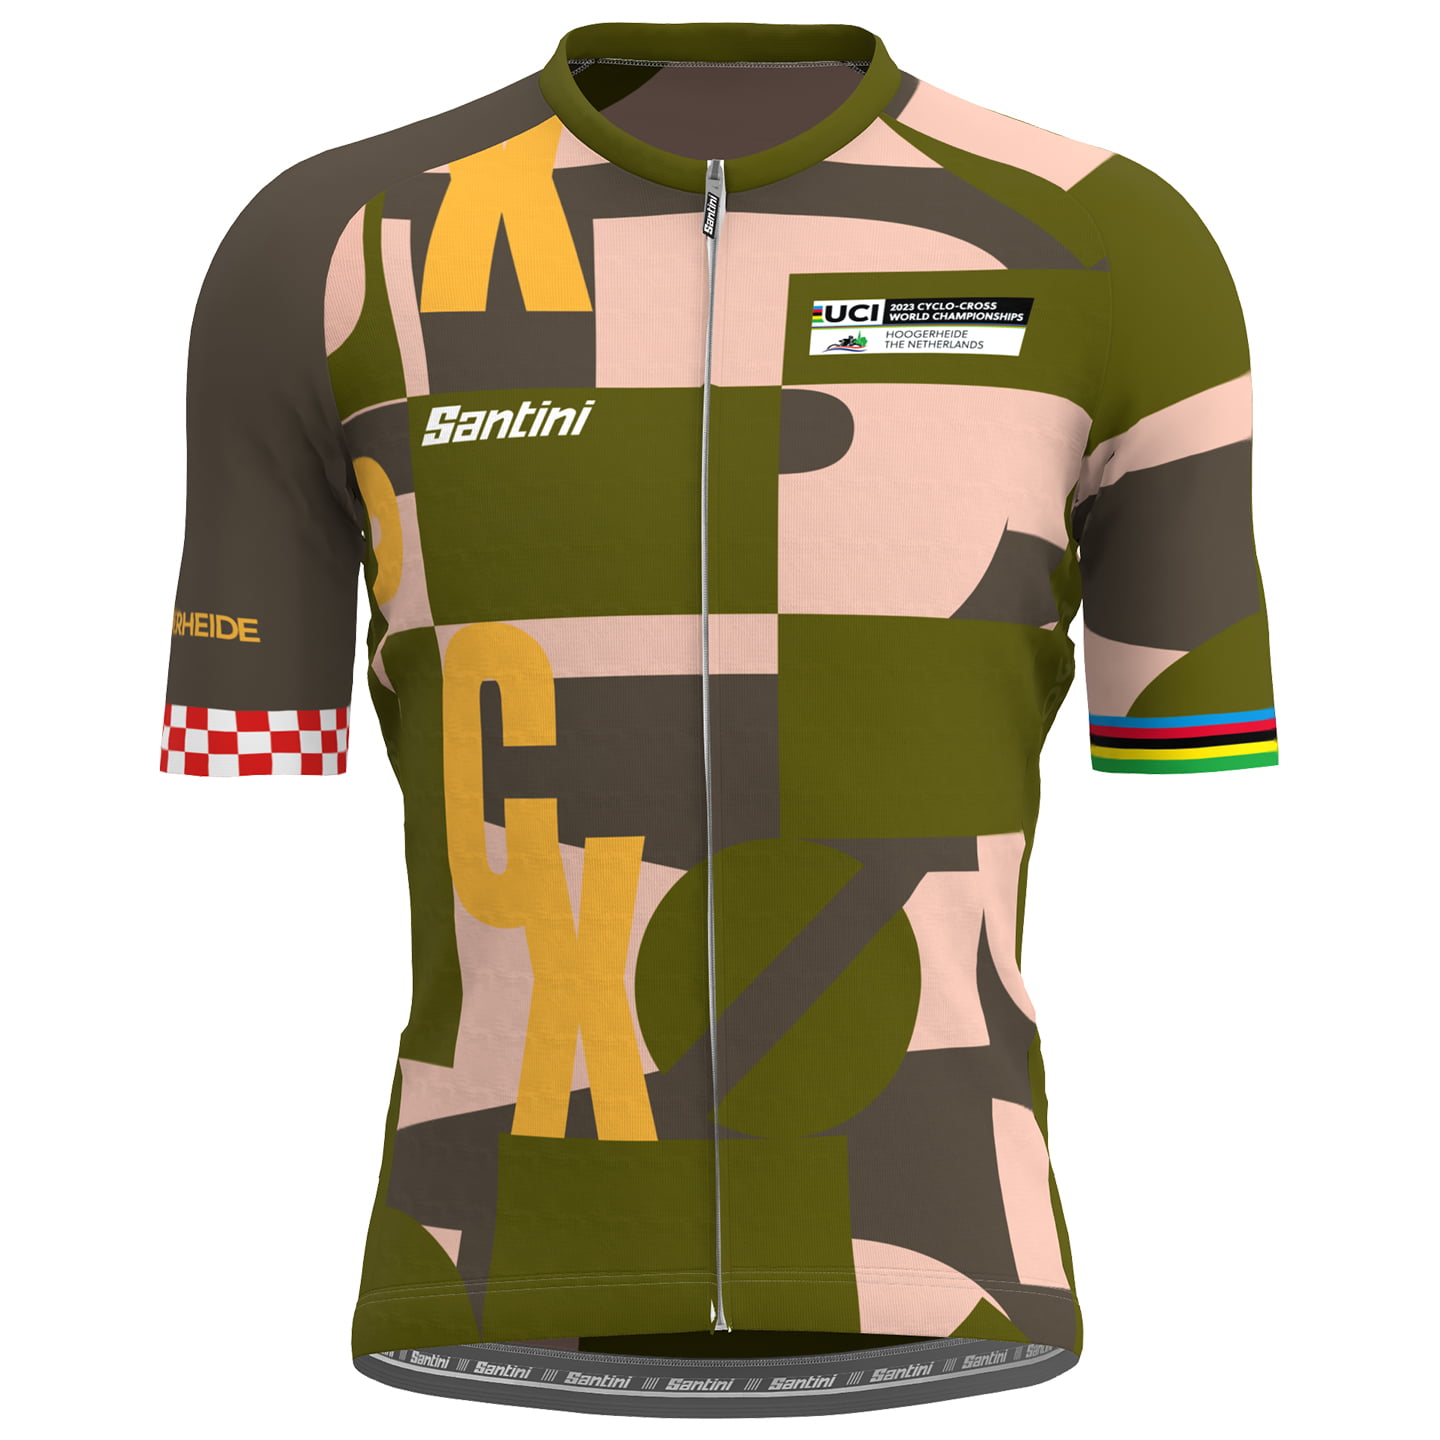 UCI WORLD CHAMPION Cyclo-Cross 2023 Short Sleeve Jersey, for men, size XL, Bike Jersey, Cycle gear